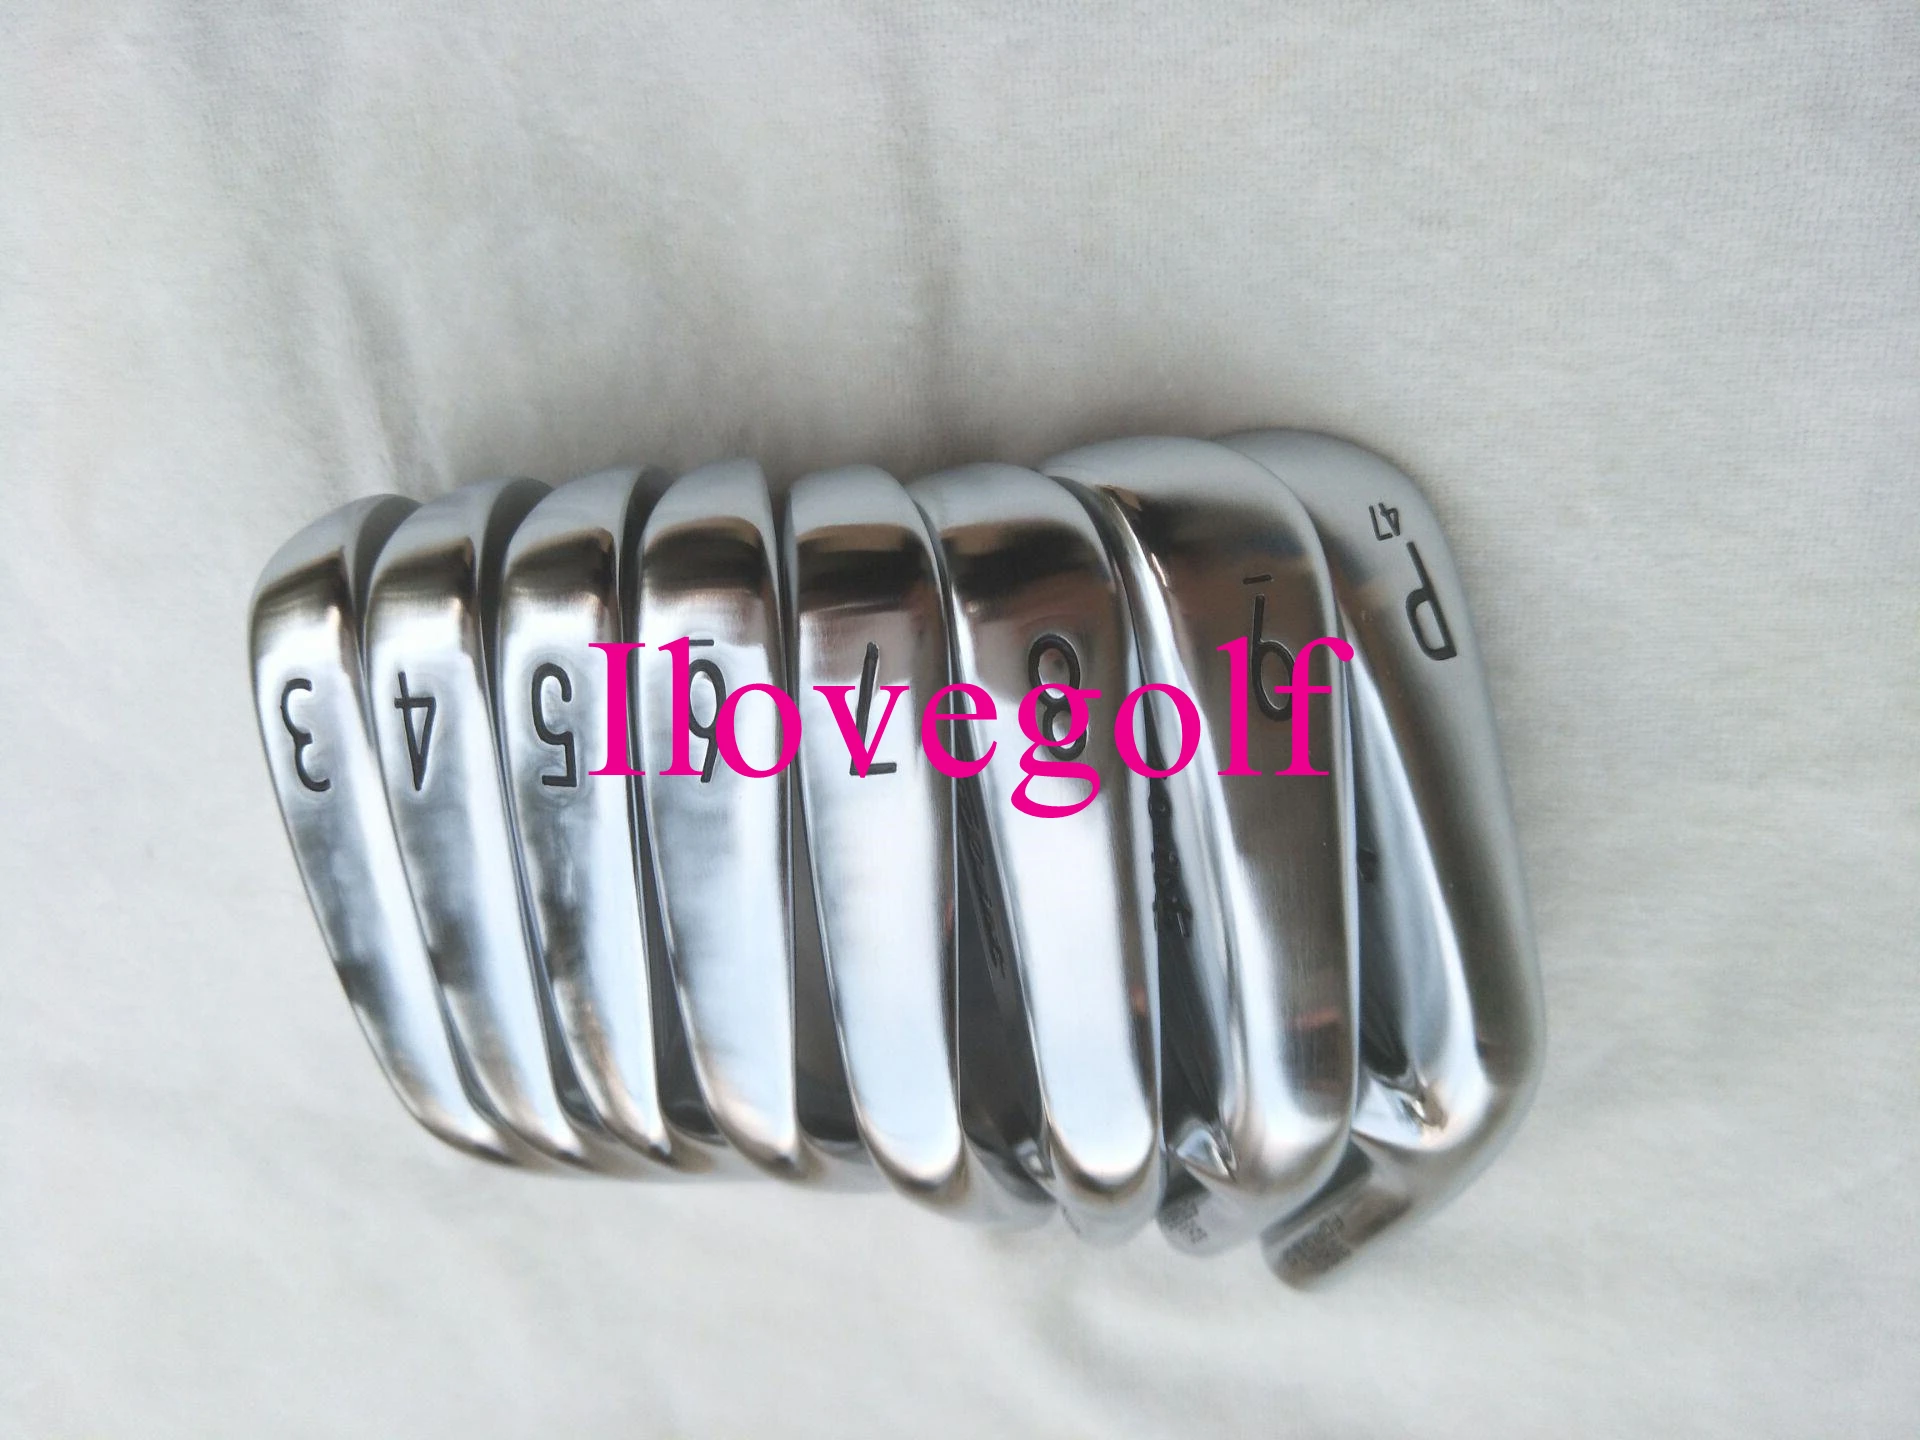 

MB 620 Golf Clubs Irons Set 620 MB Irons Golf Clubs 3-9P Regular/Stiff Steel/Graphite Shafts Headcovers DHL Free Shipping